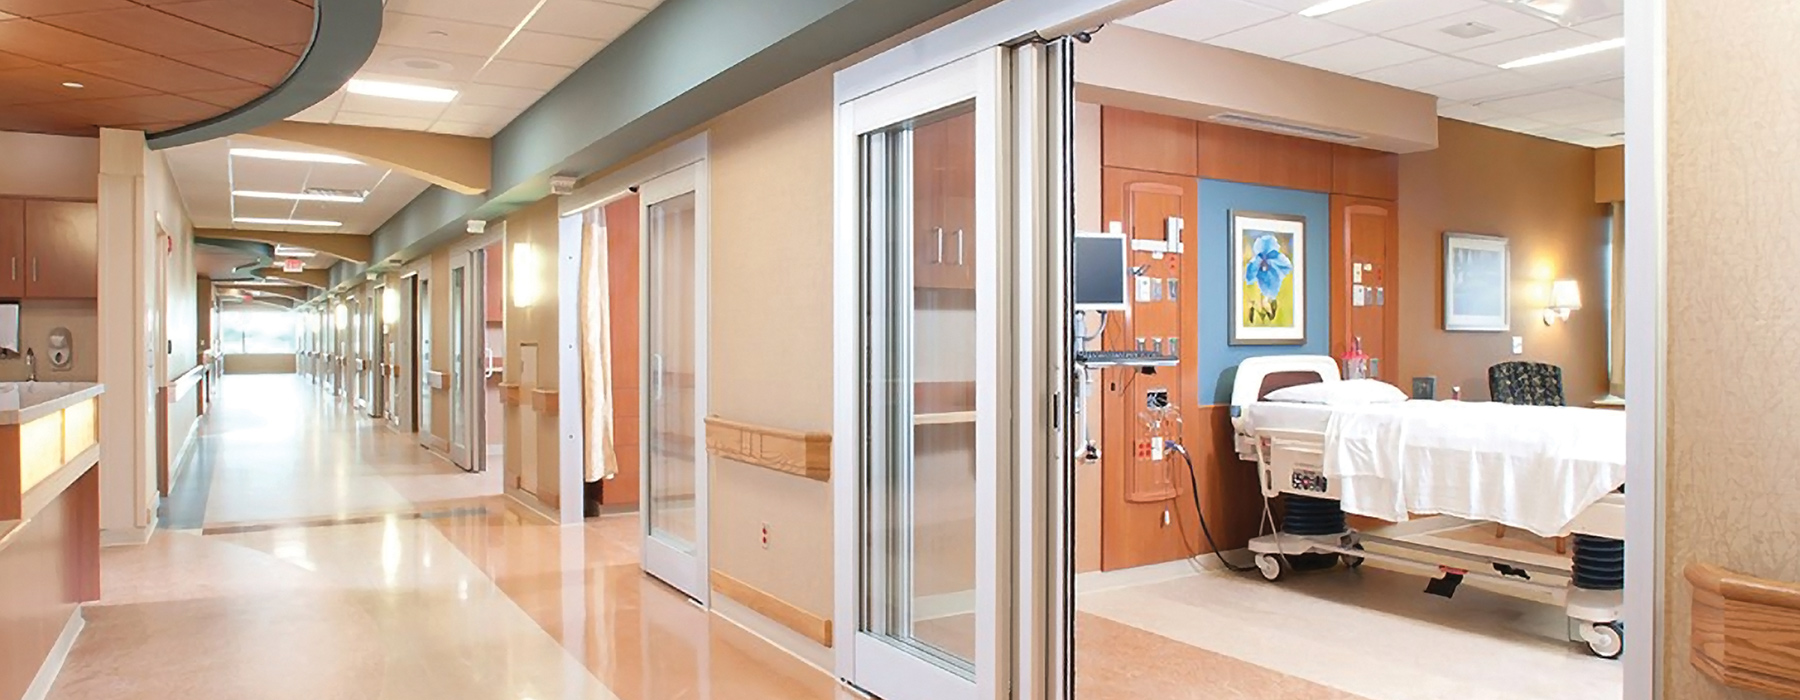 doors-for-health-care-and-hospitals